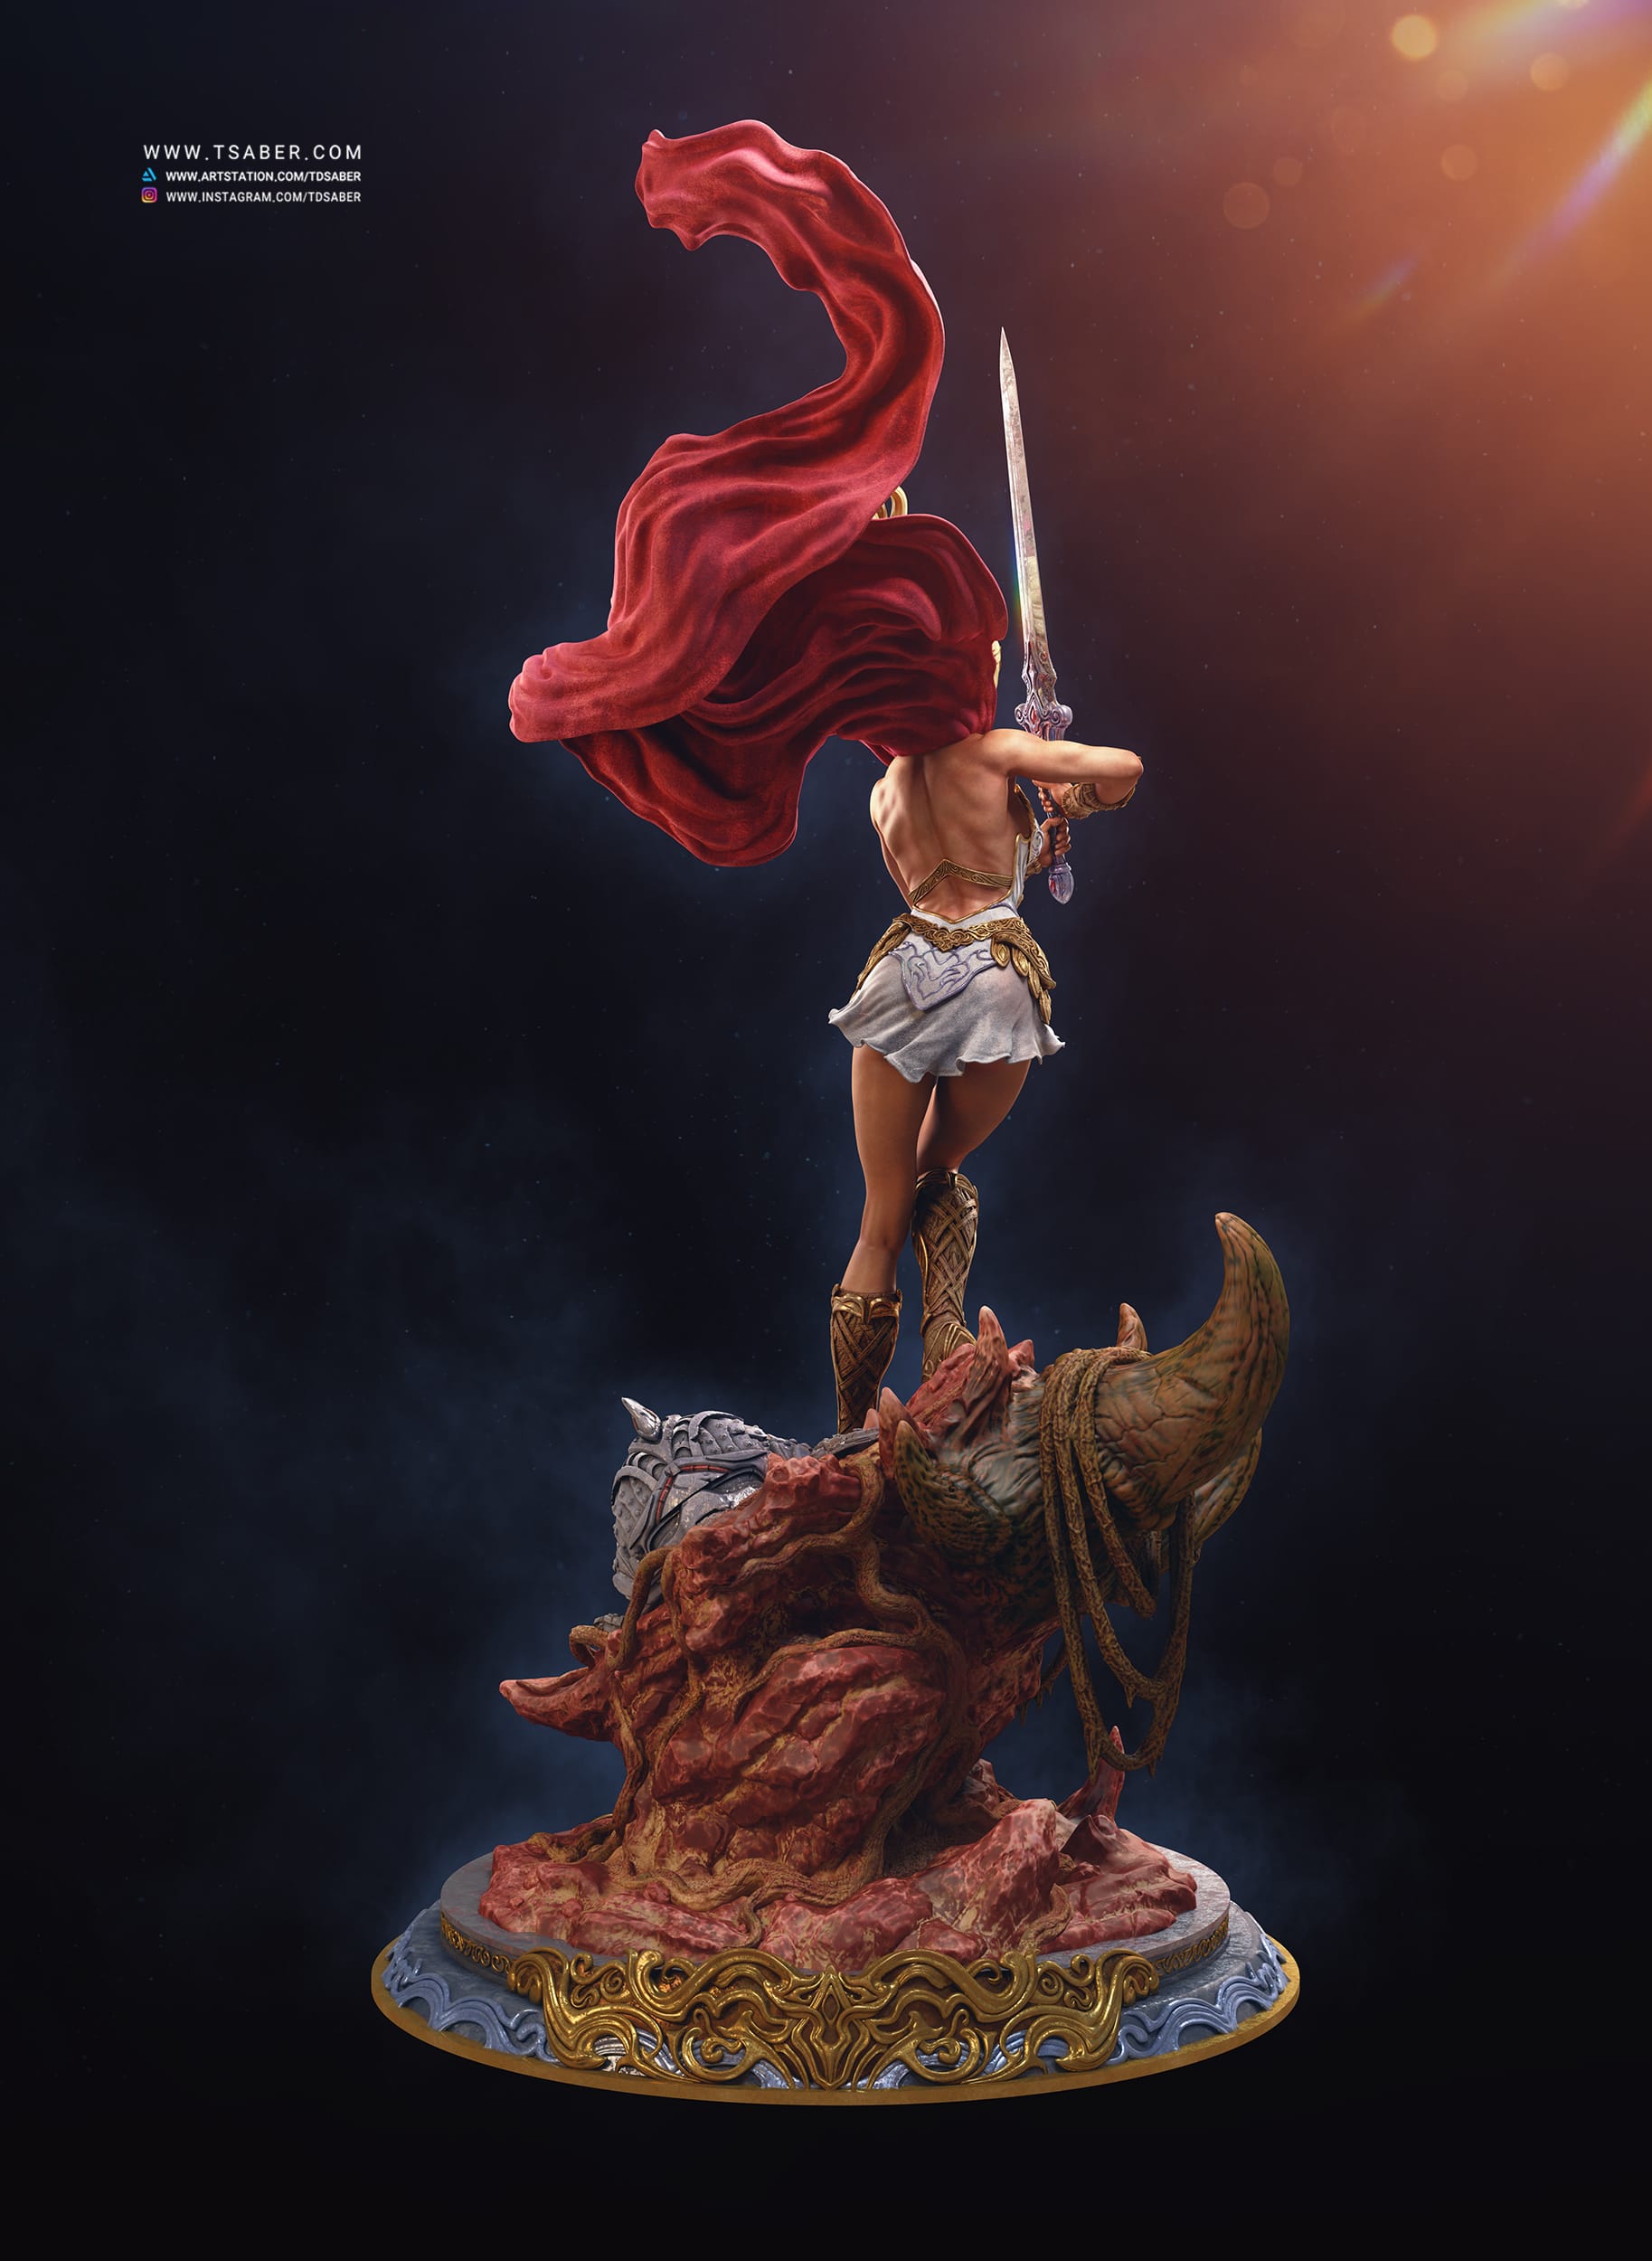 Shera Statue - Masters of the Universe – Princess Of Power - Collectible statue figurine – Tsaber - Render 05